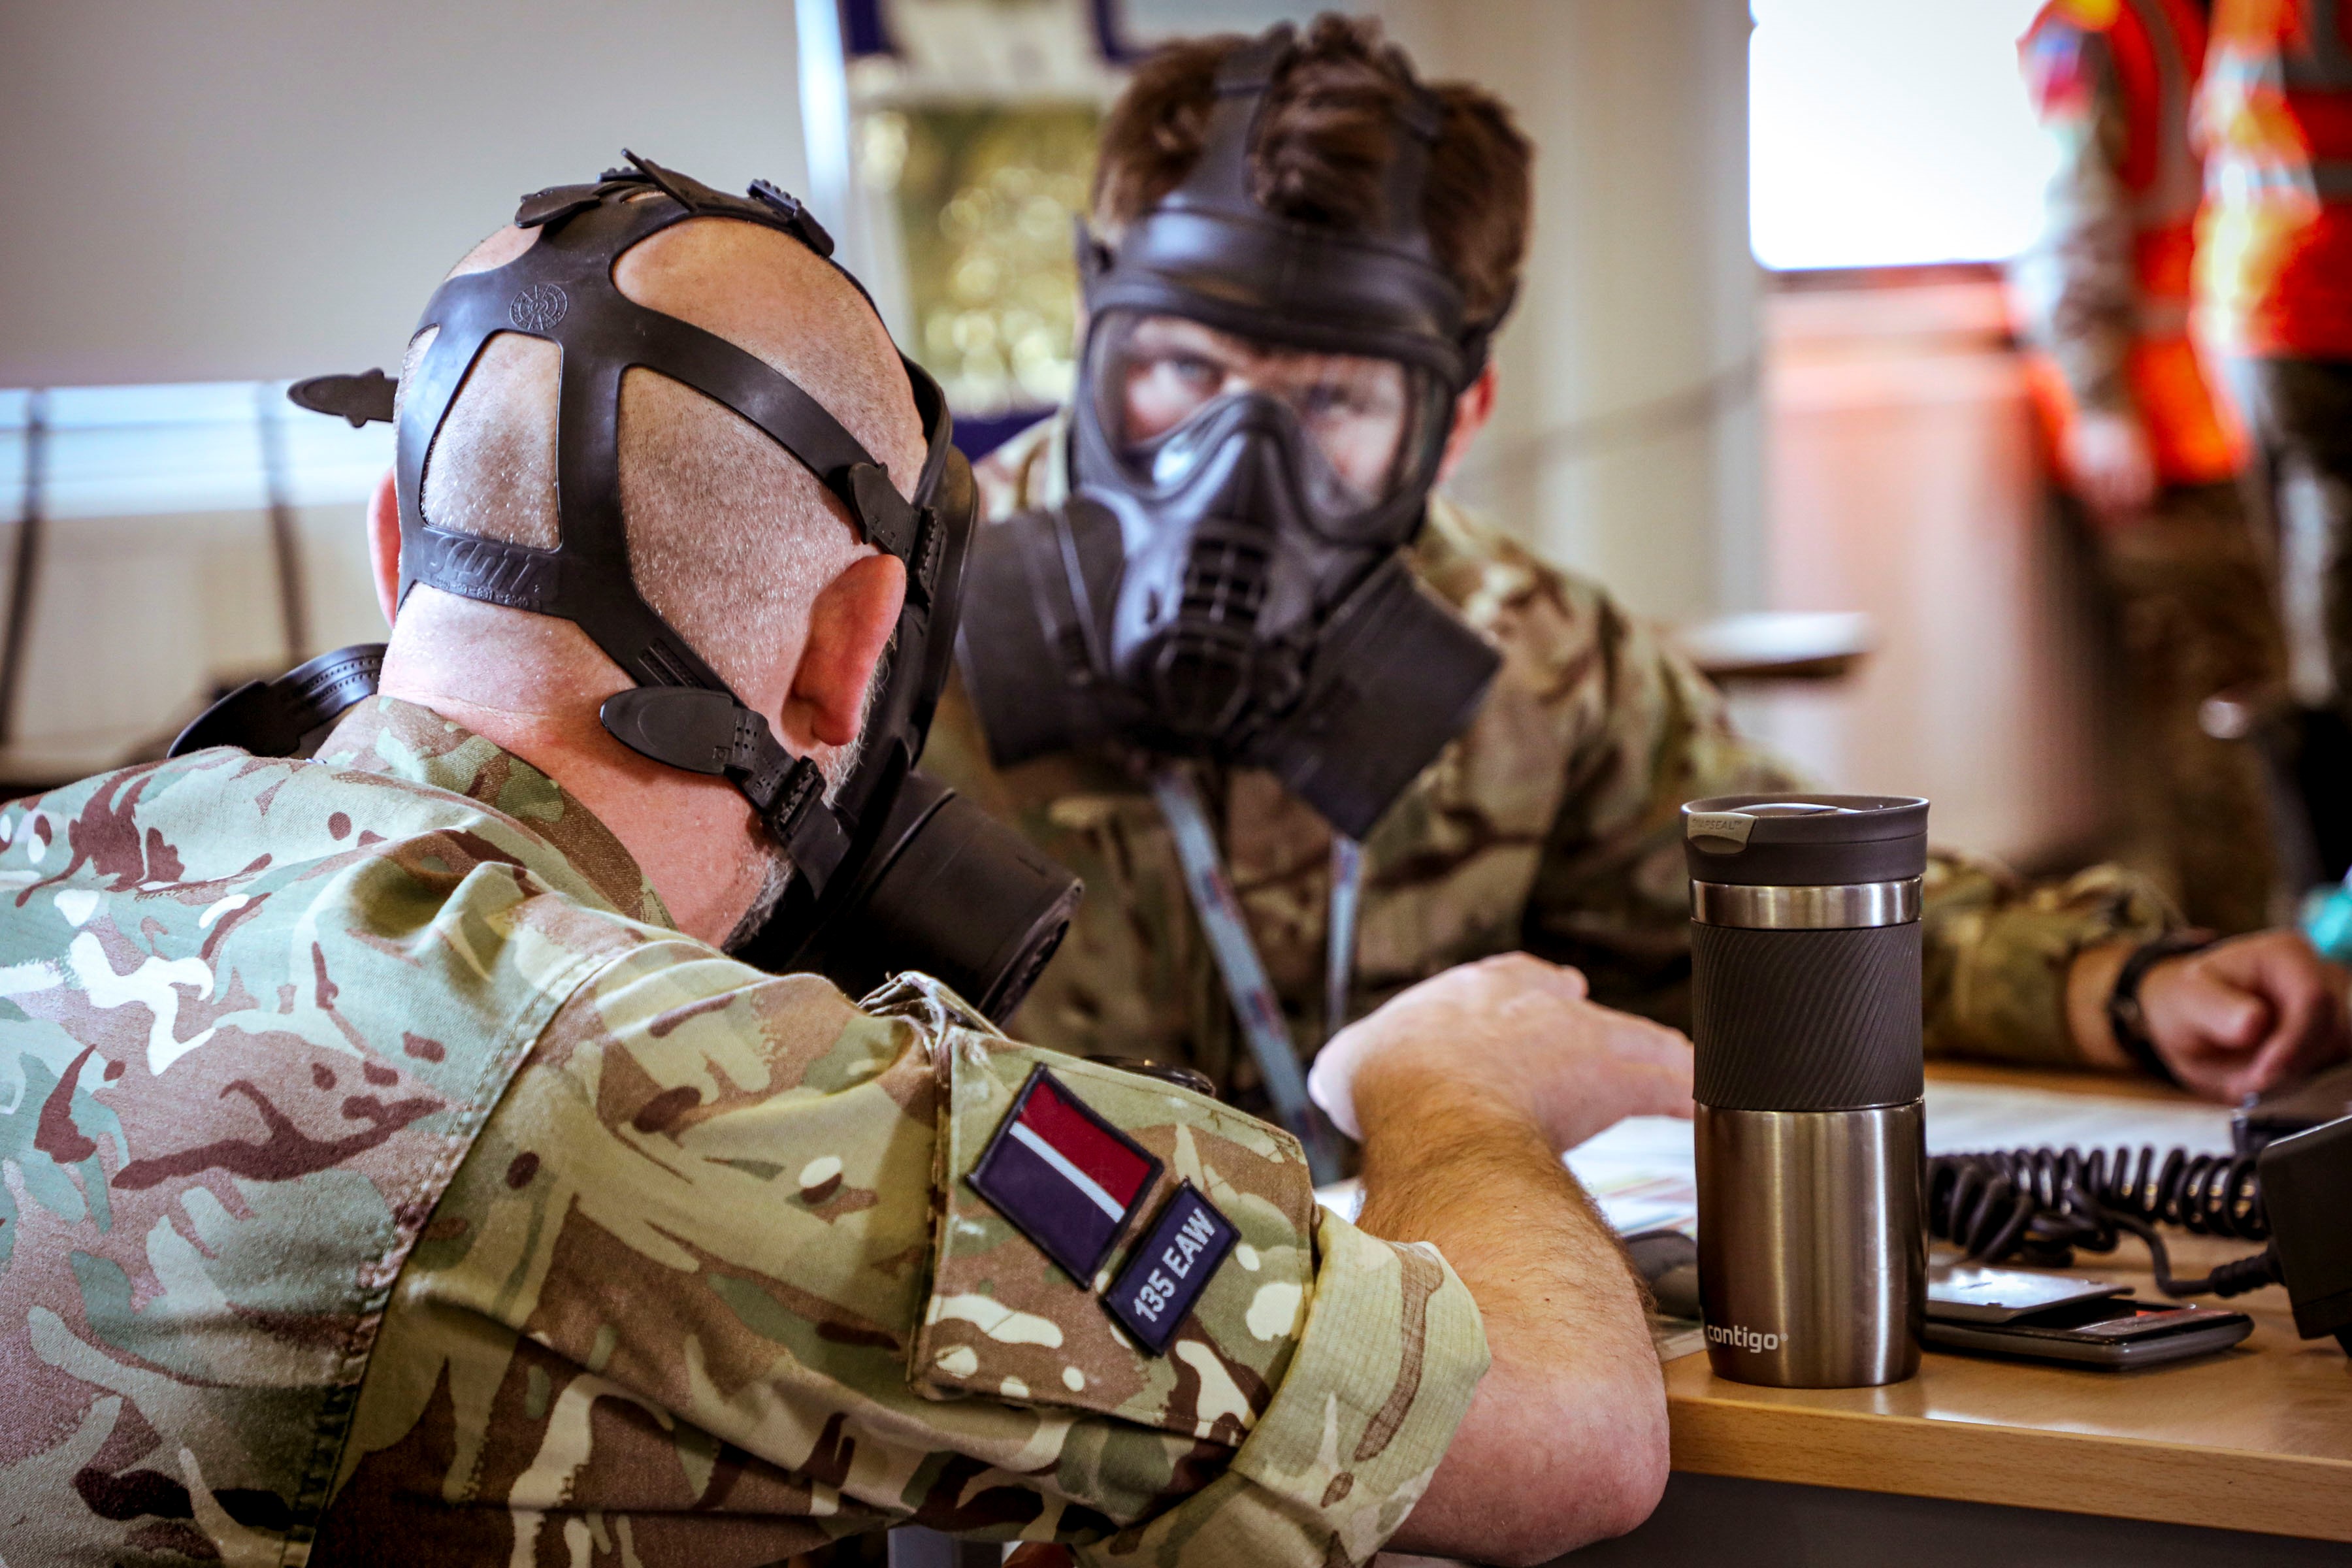 Image shows two RAF aviators wearing a respiratory gas mask at a table..